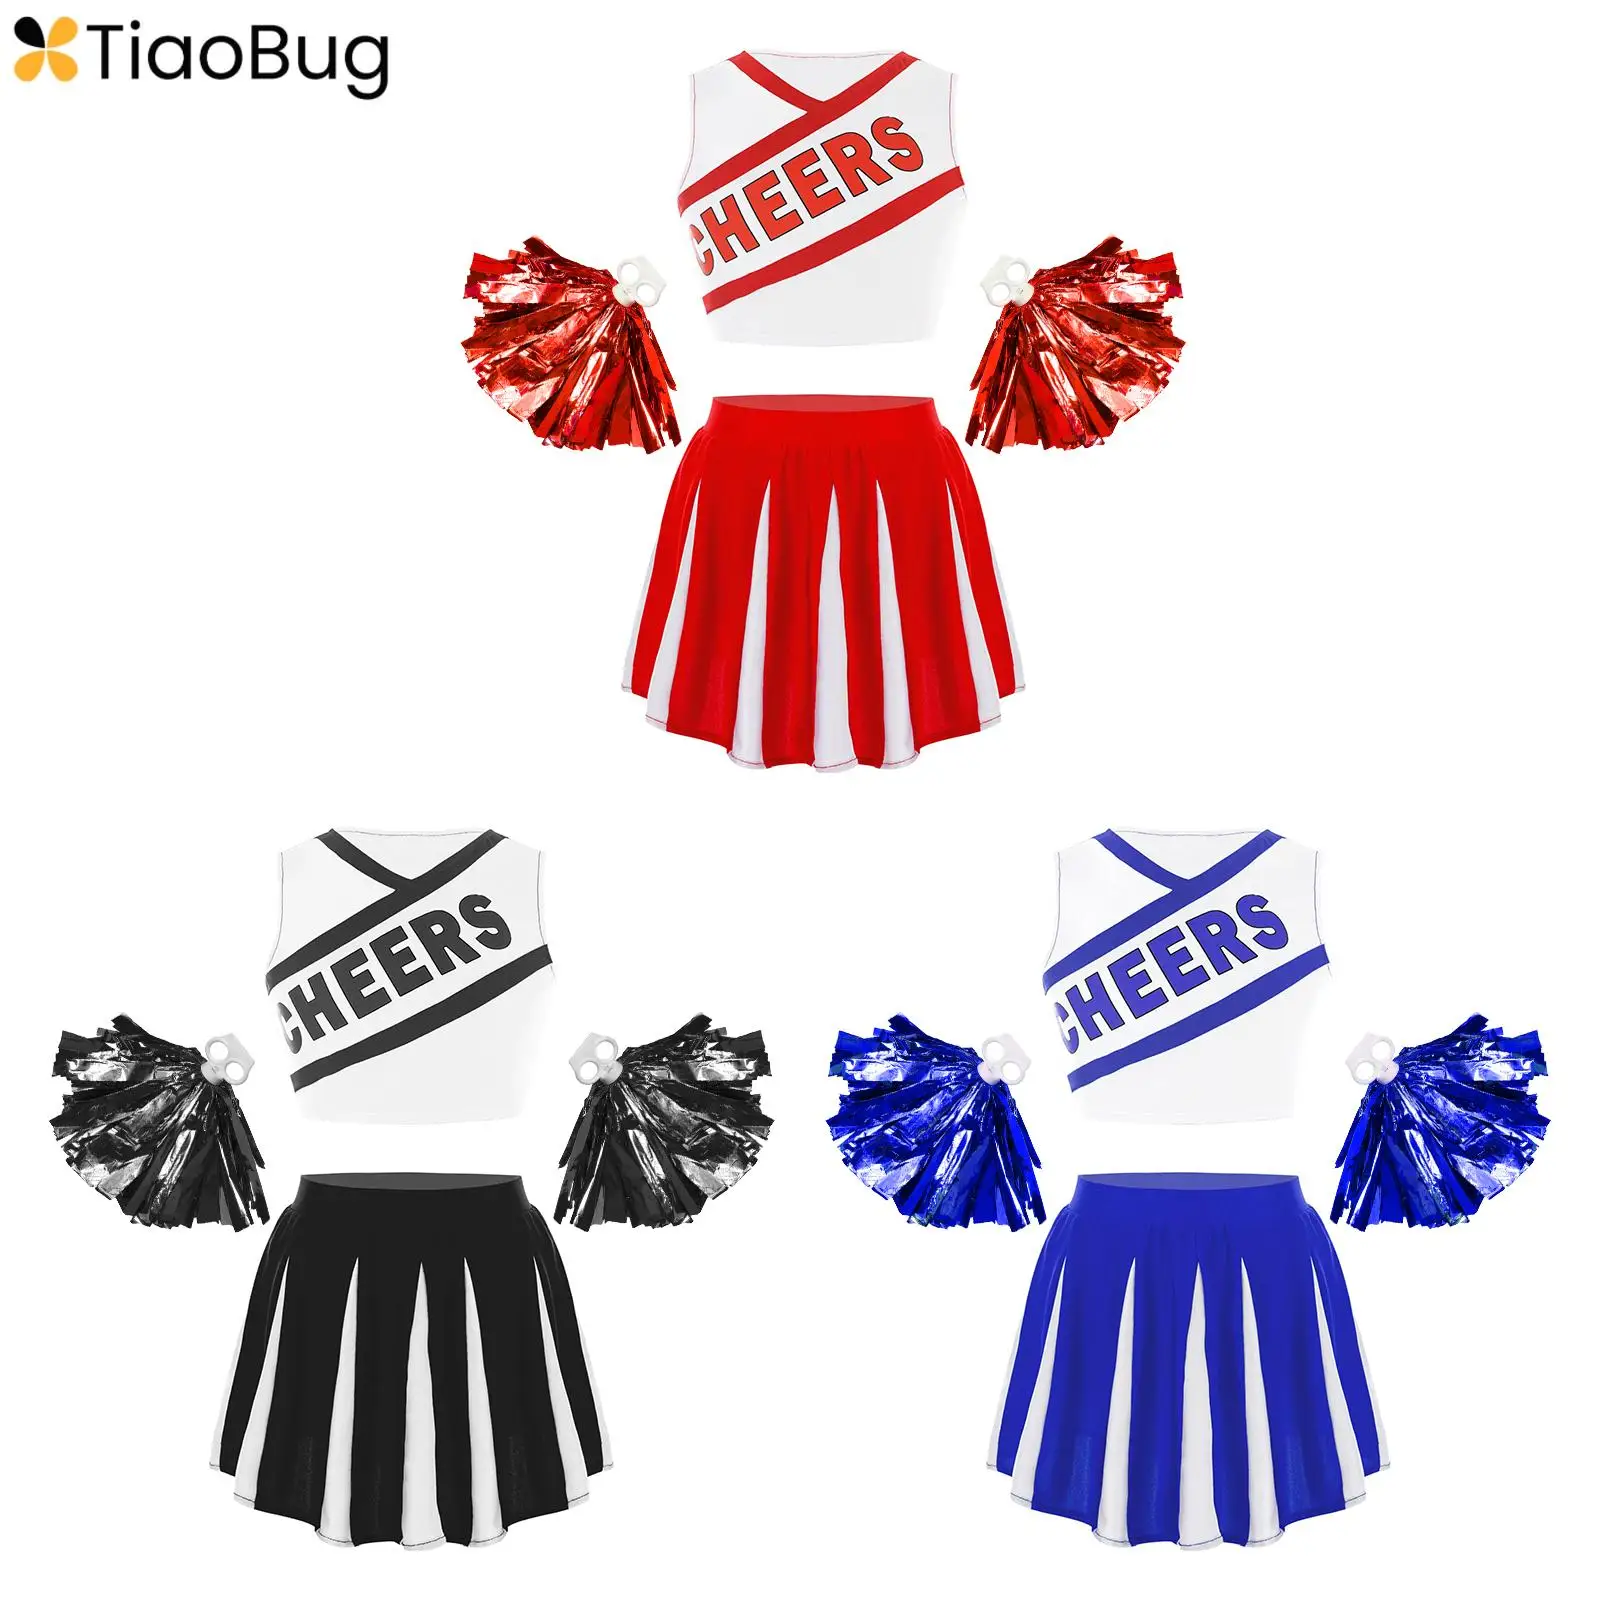 

Kids Girls Cheerleader Costume Carnival Halloween Party Dress Up Cheerleading Uniform Crop Top with Pleated Skirt and Pom Poms